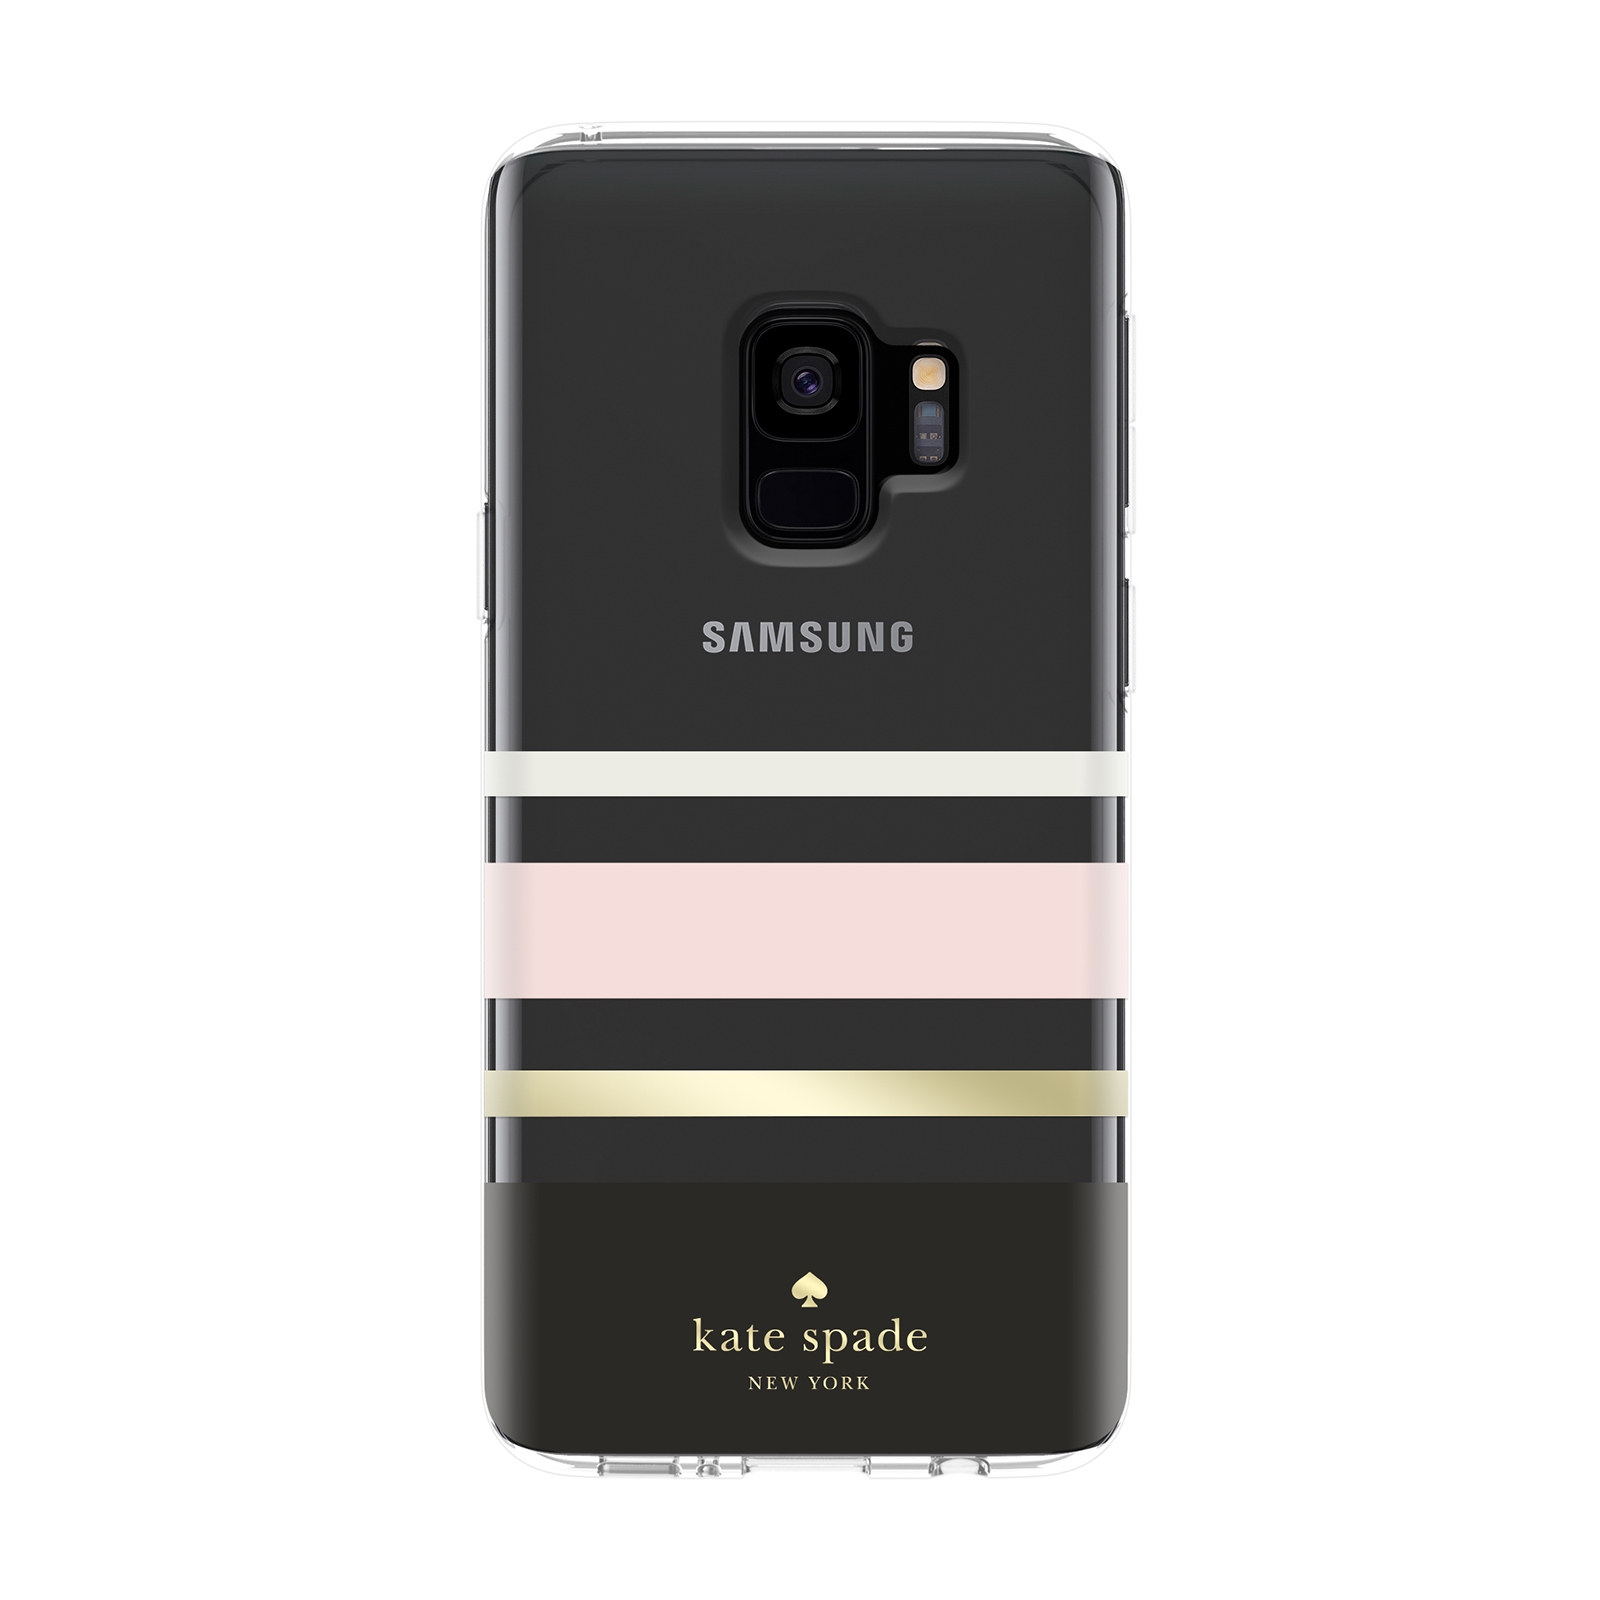 Kate Spade Protective Hardshell Case for Galaxy S9, Charlotte Strip Mobile  Accessories - KSSA-041-CSBC | Samsung US